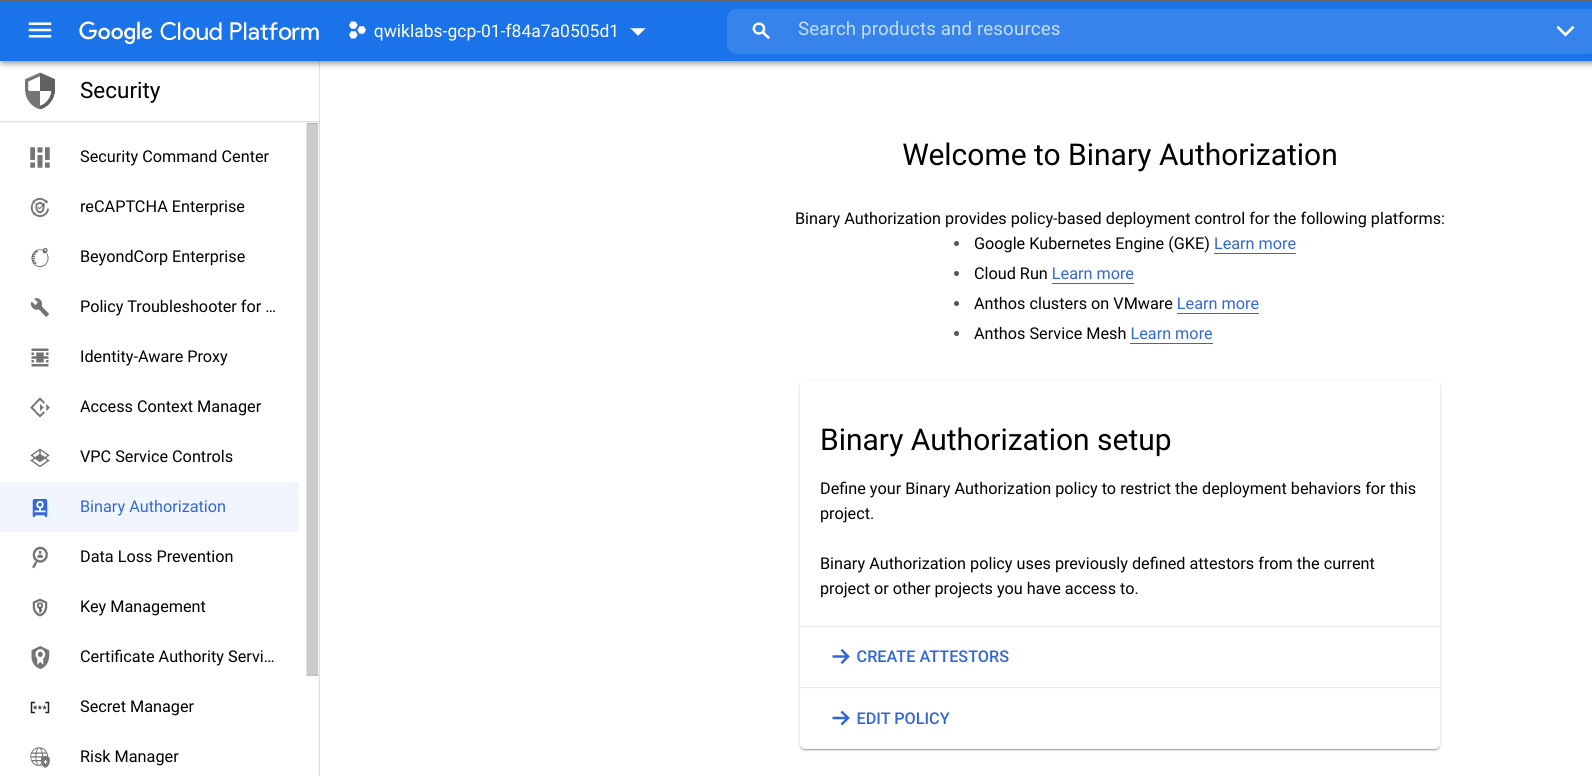 Welcome to Binary Authorization page